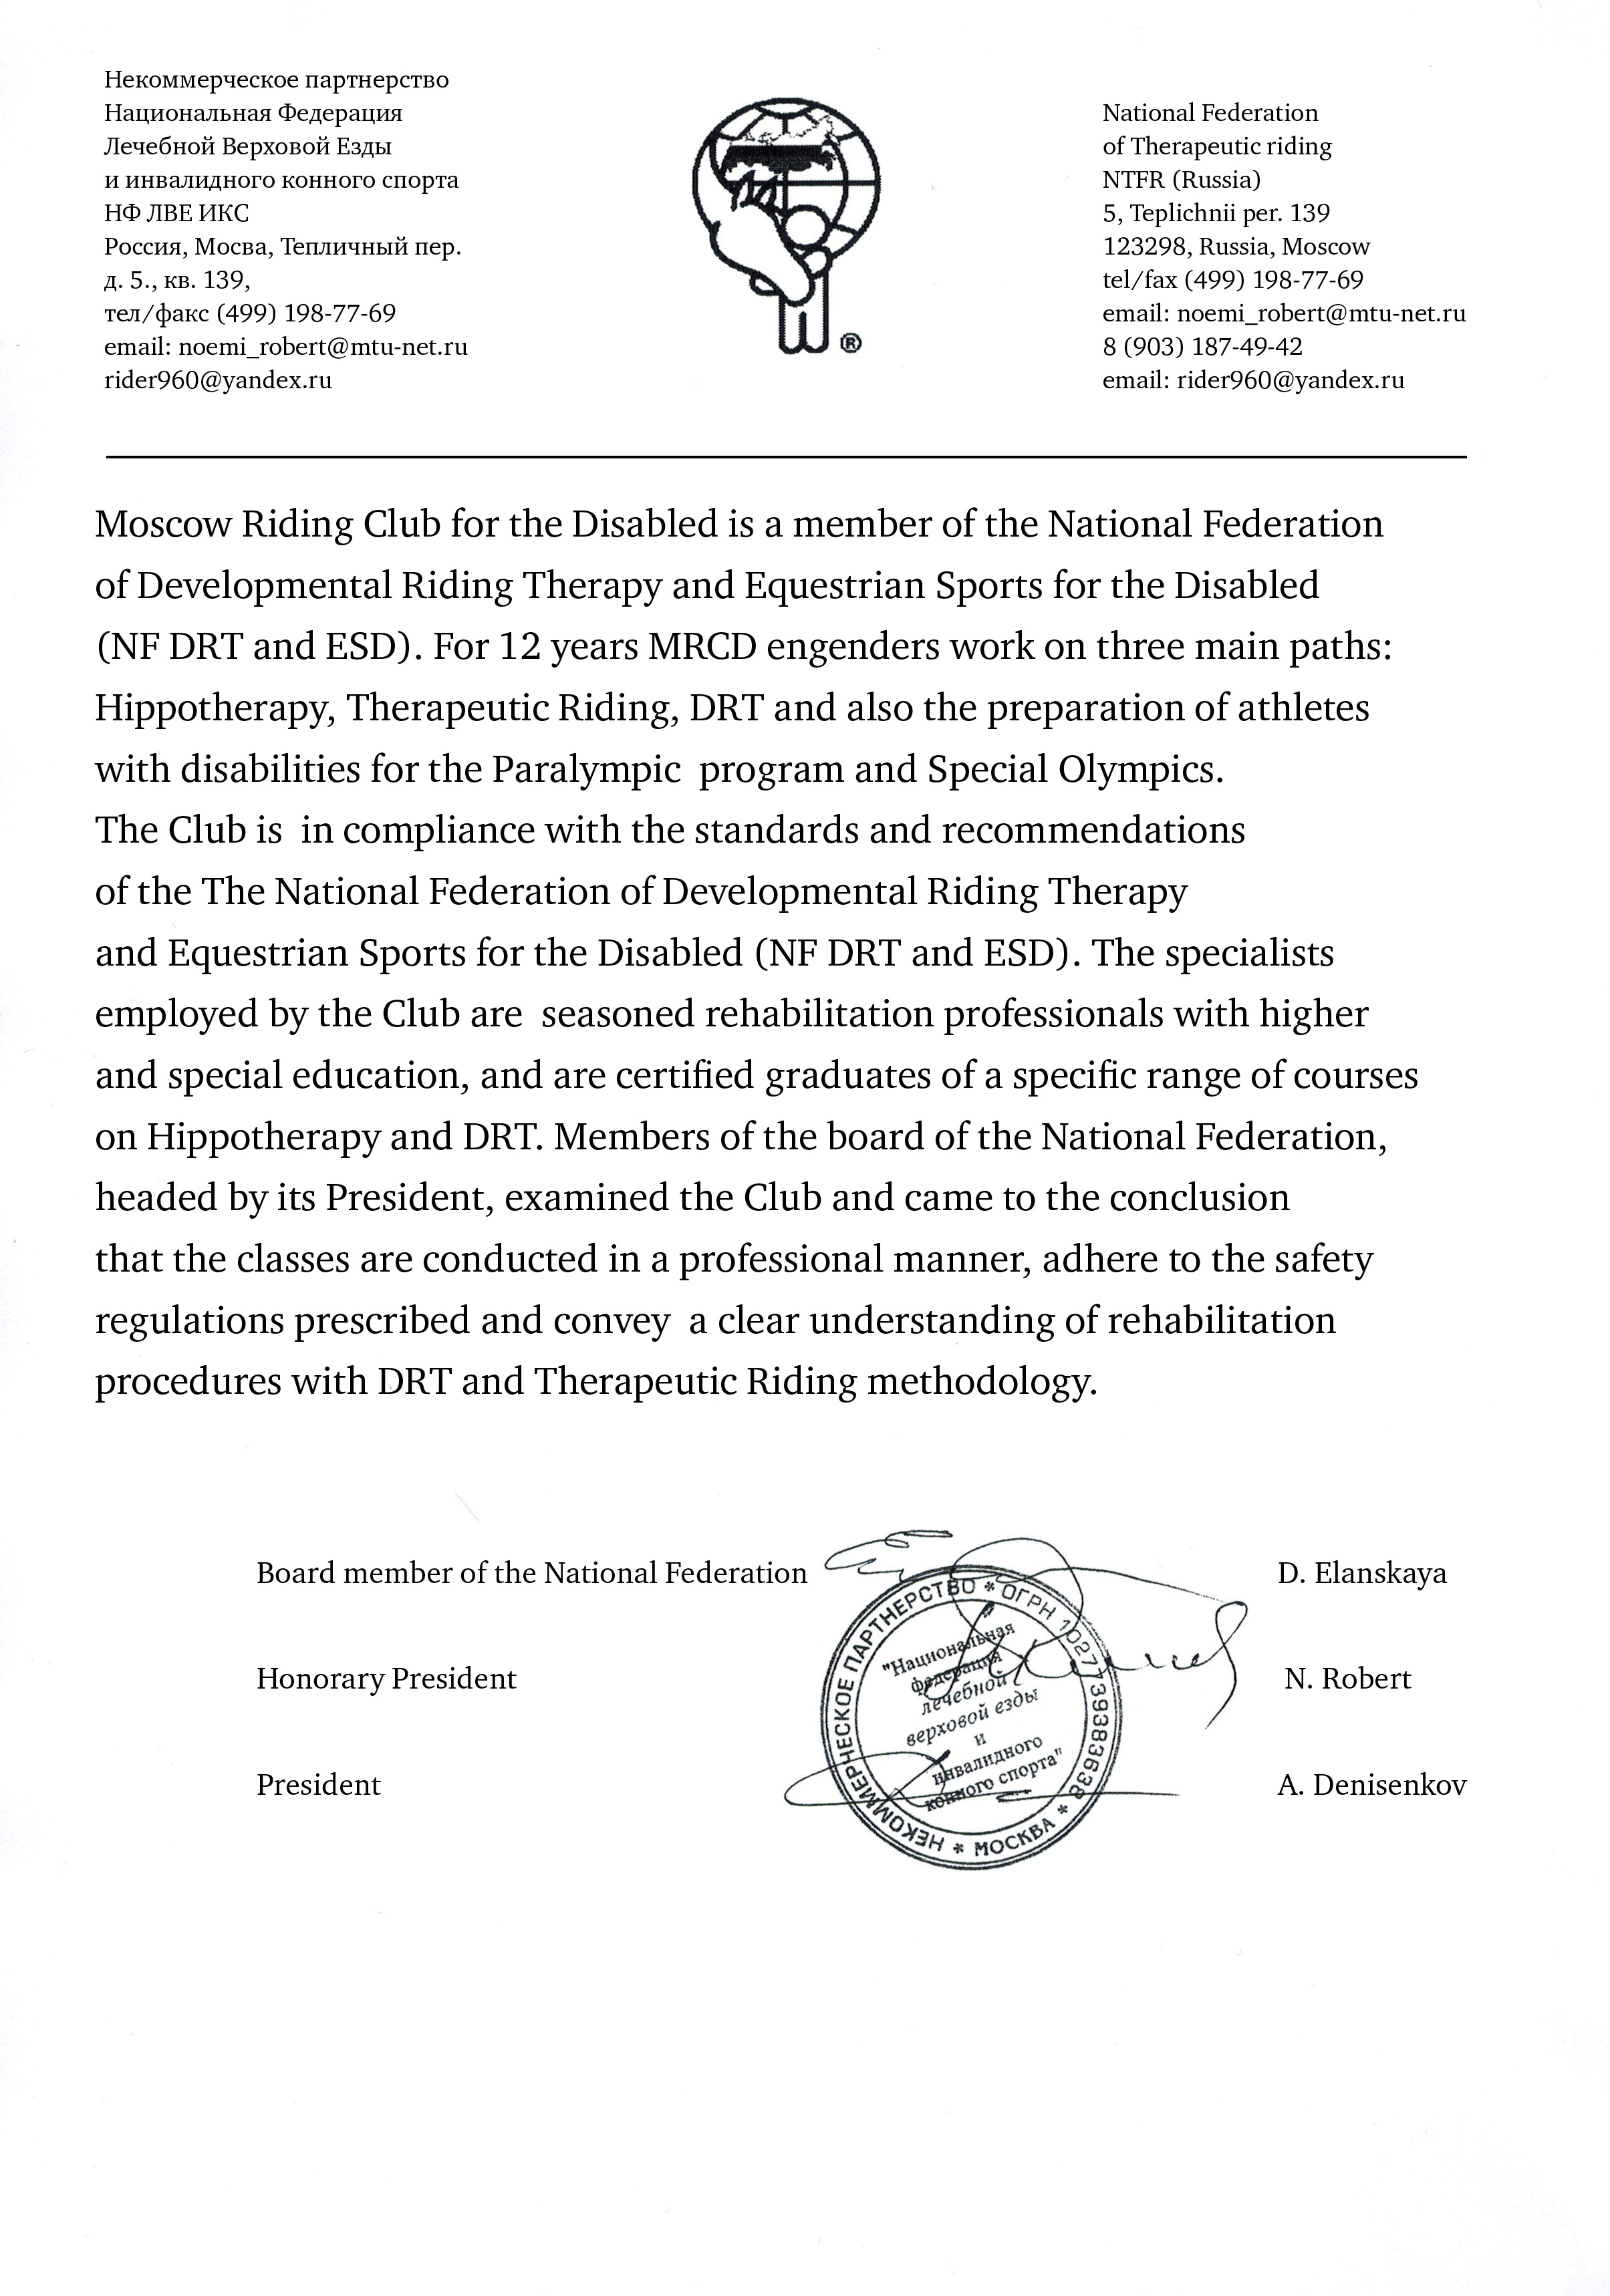 Letter from the National Federation of Developmental Riding Therapy and Equestrian Sport for the Disabled